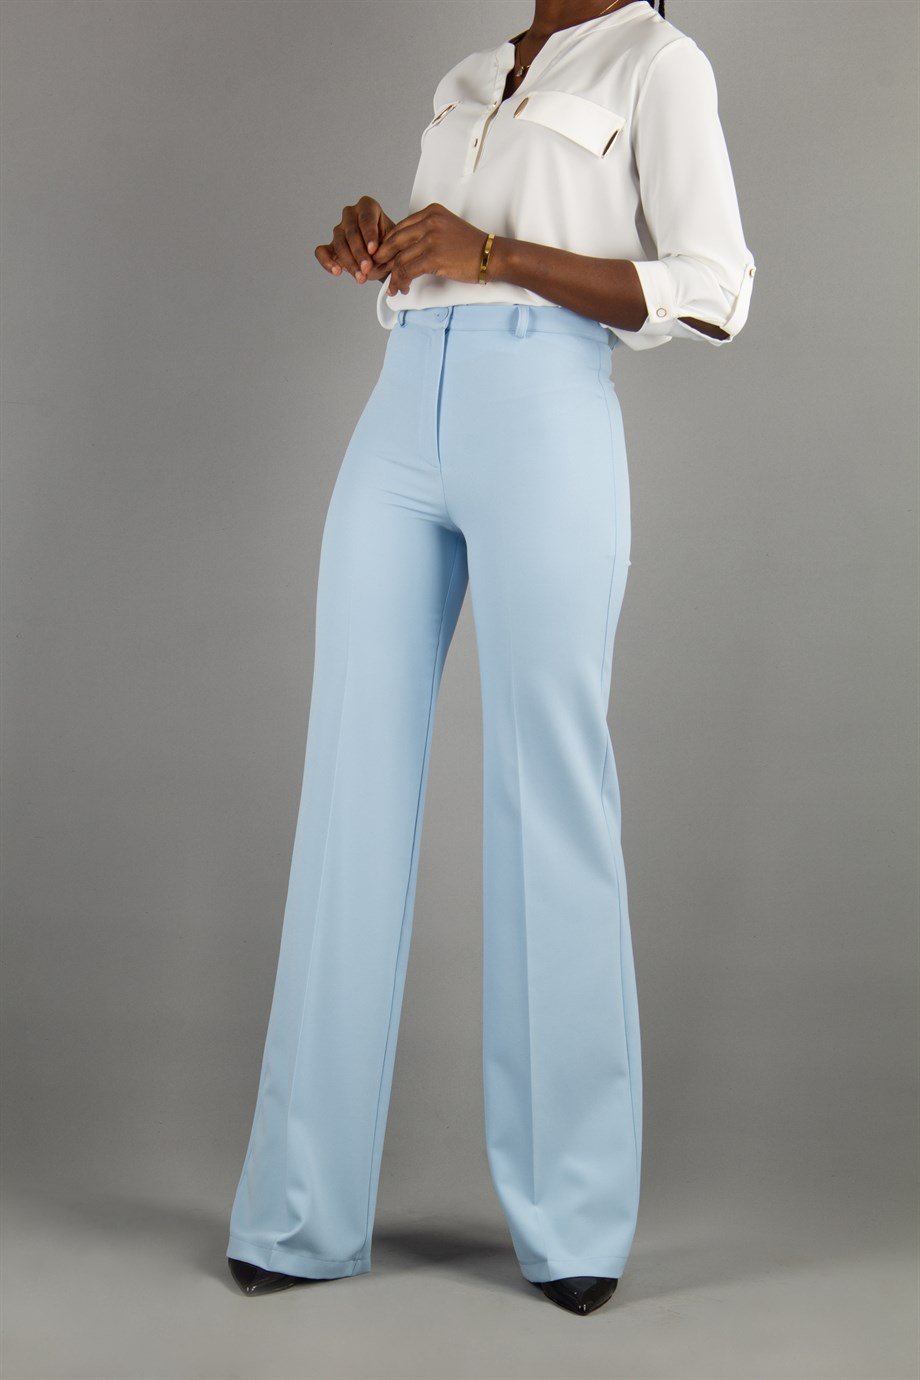 Classic Pants Office Trouser - Baby Blue - Wholesale Womens